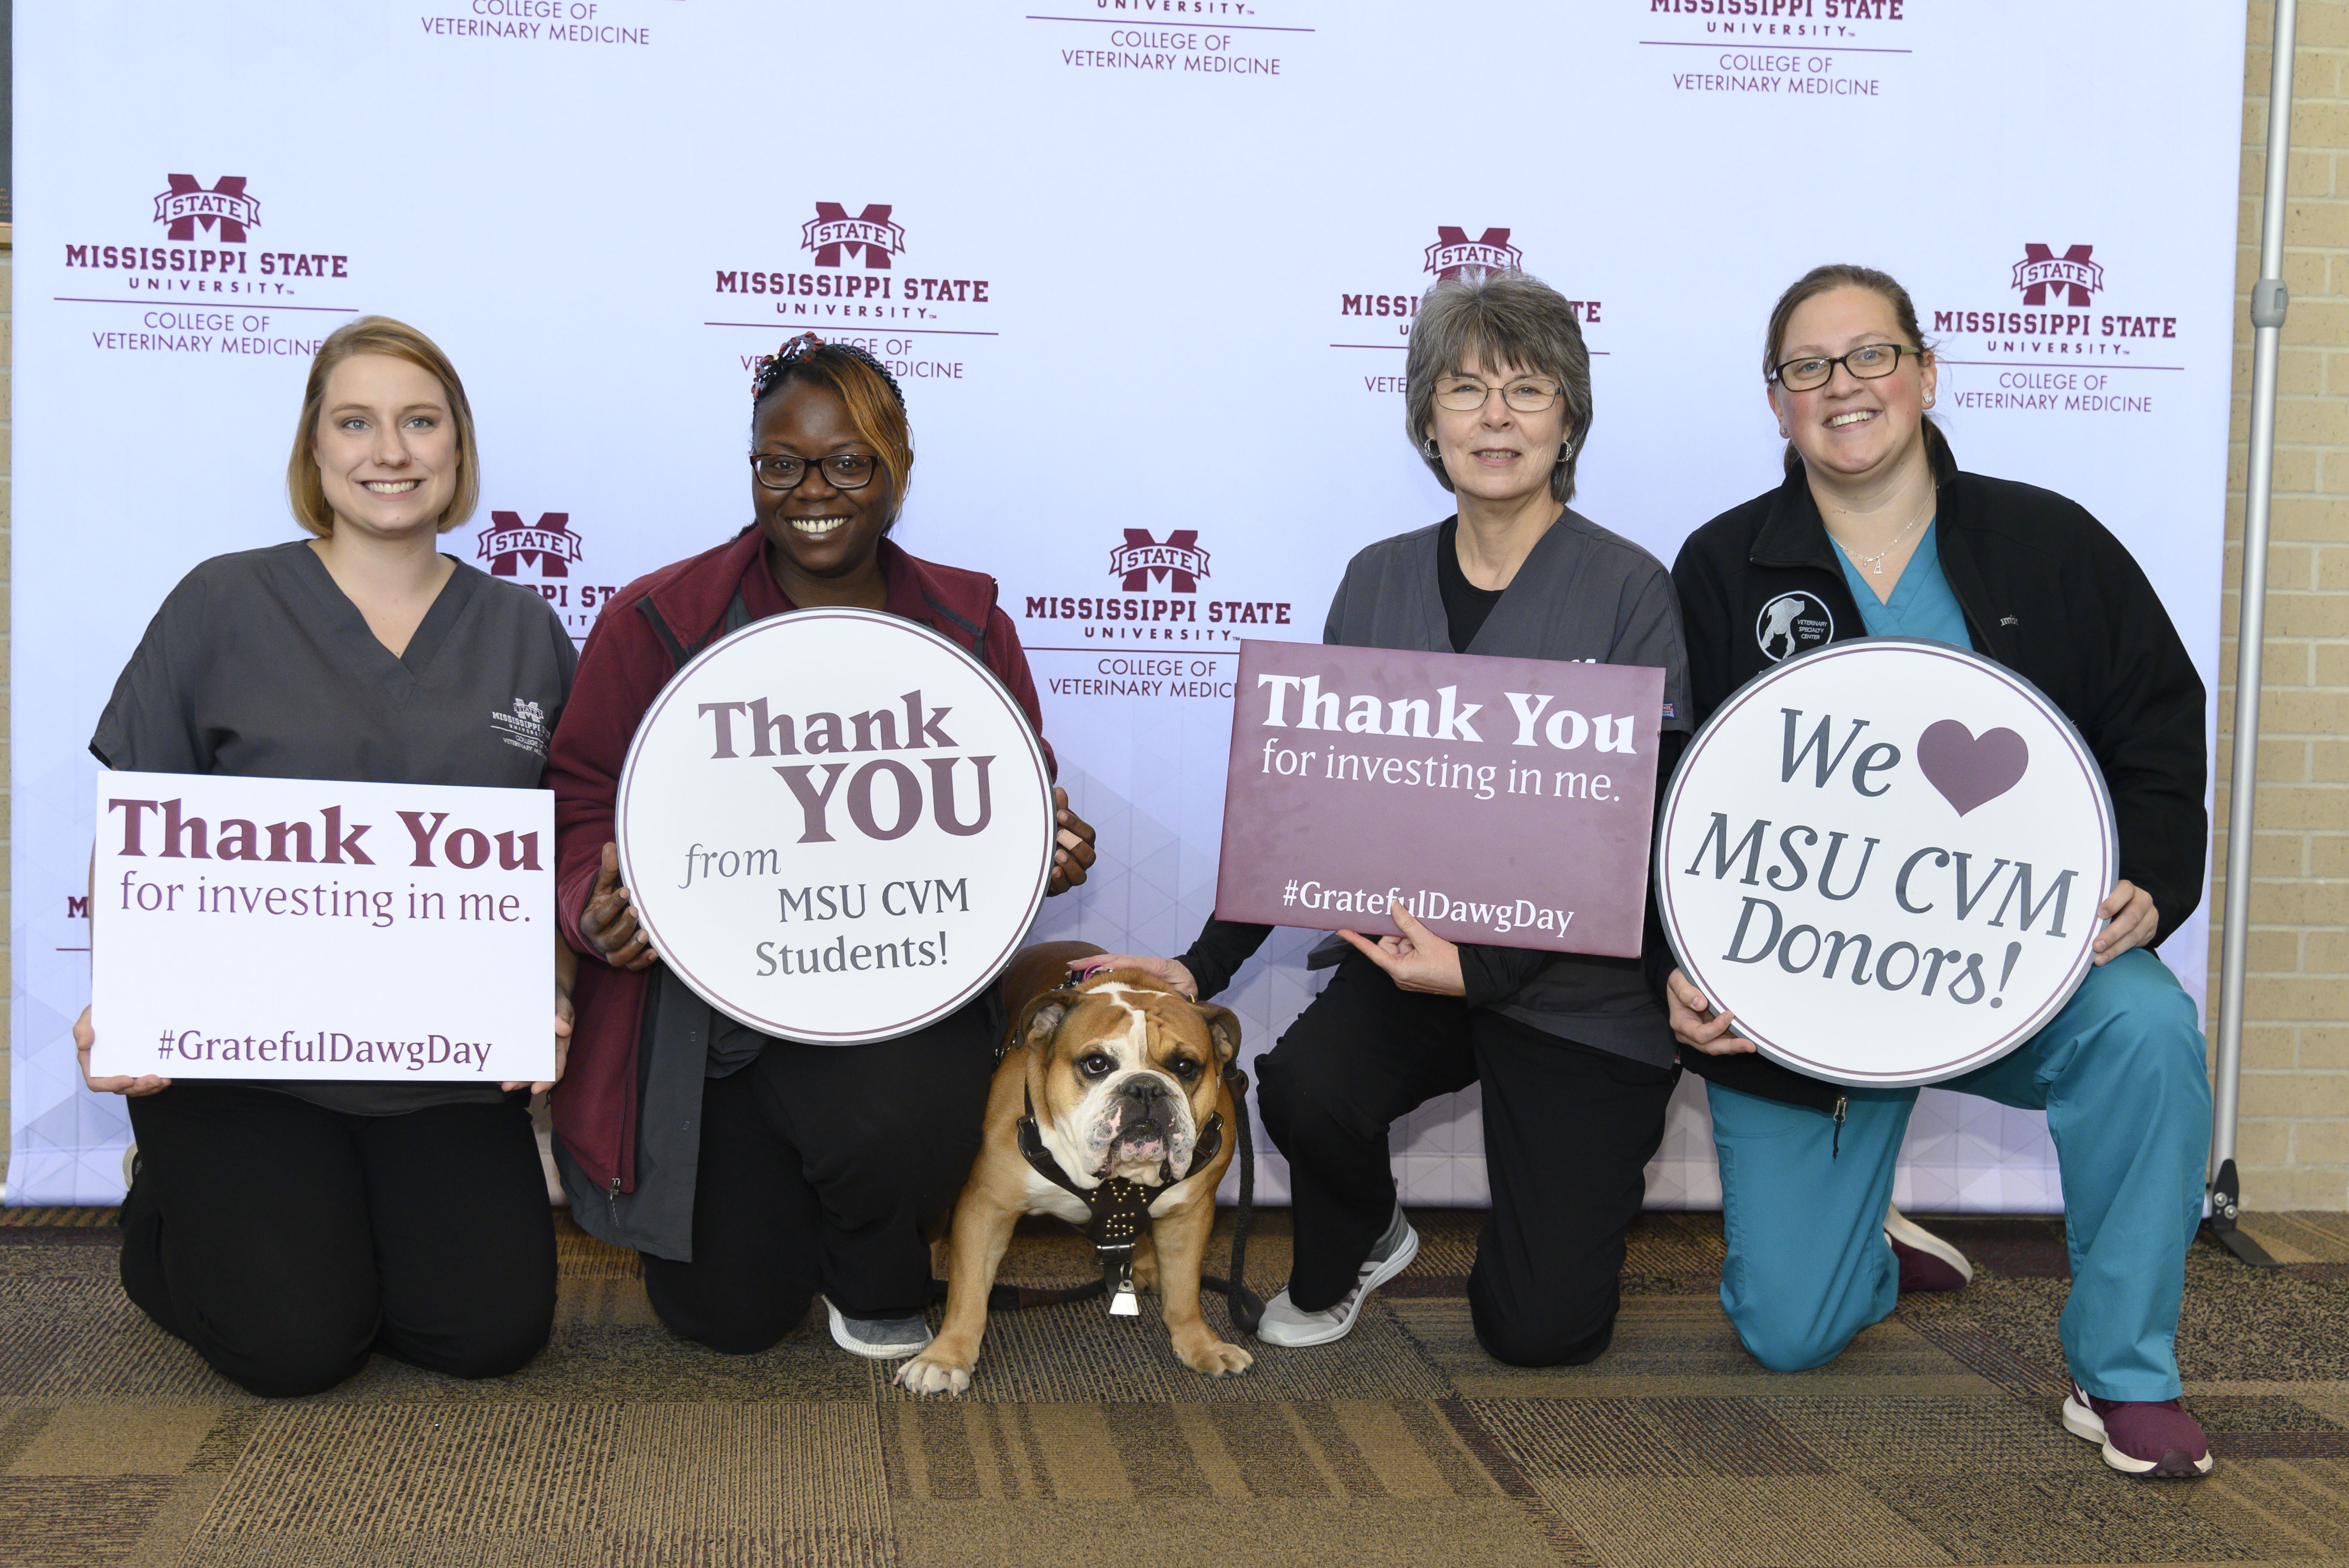 Four people pose with thank you signs and a bulldog